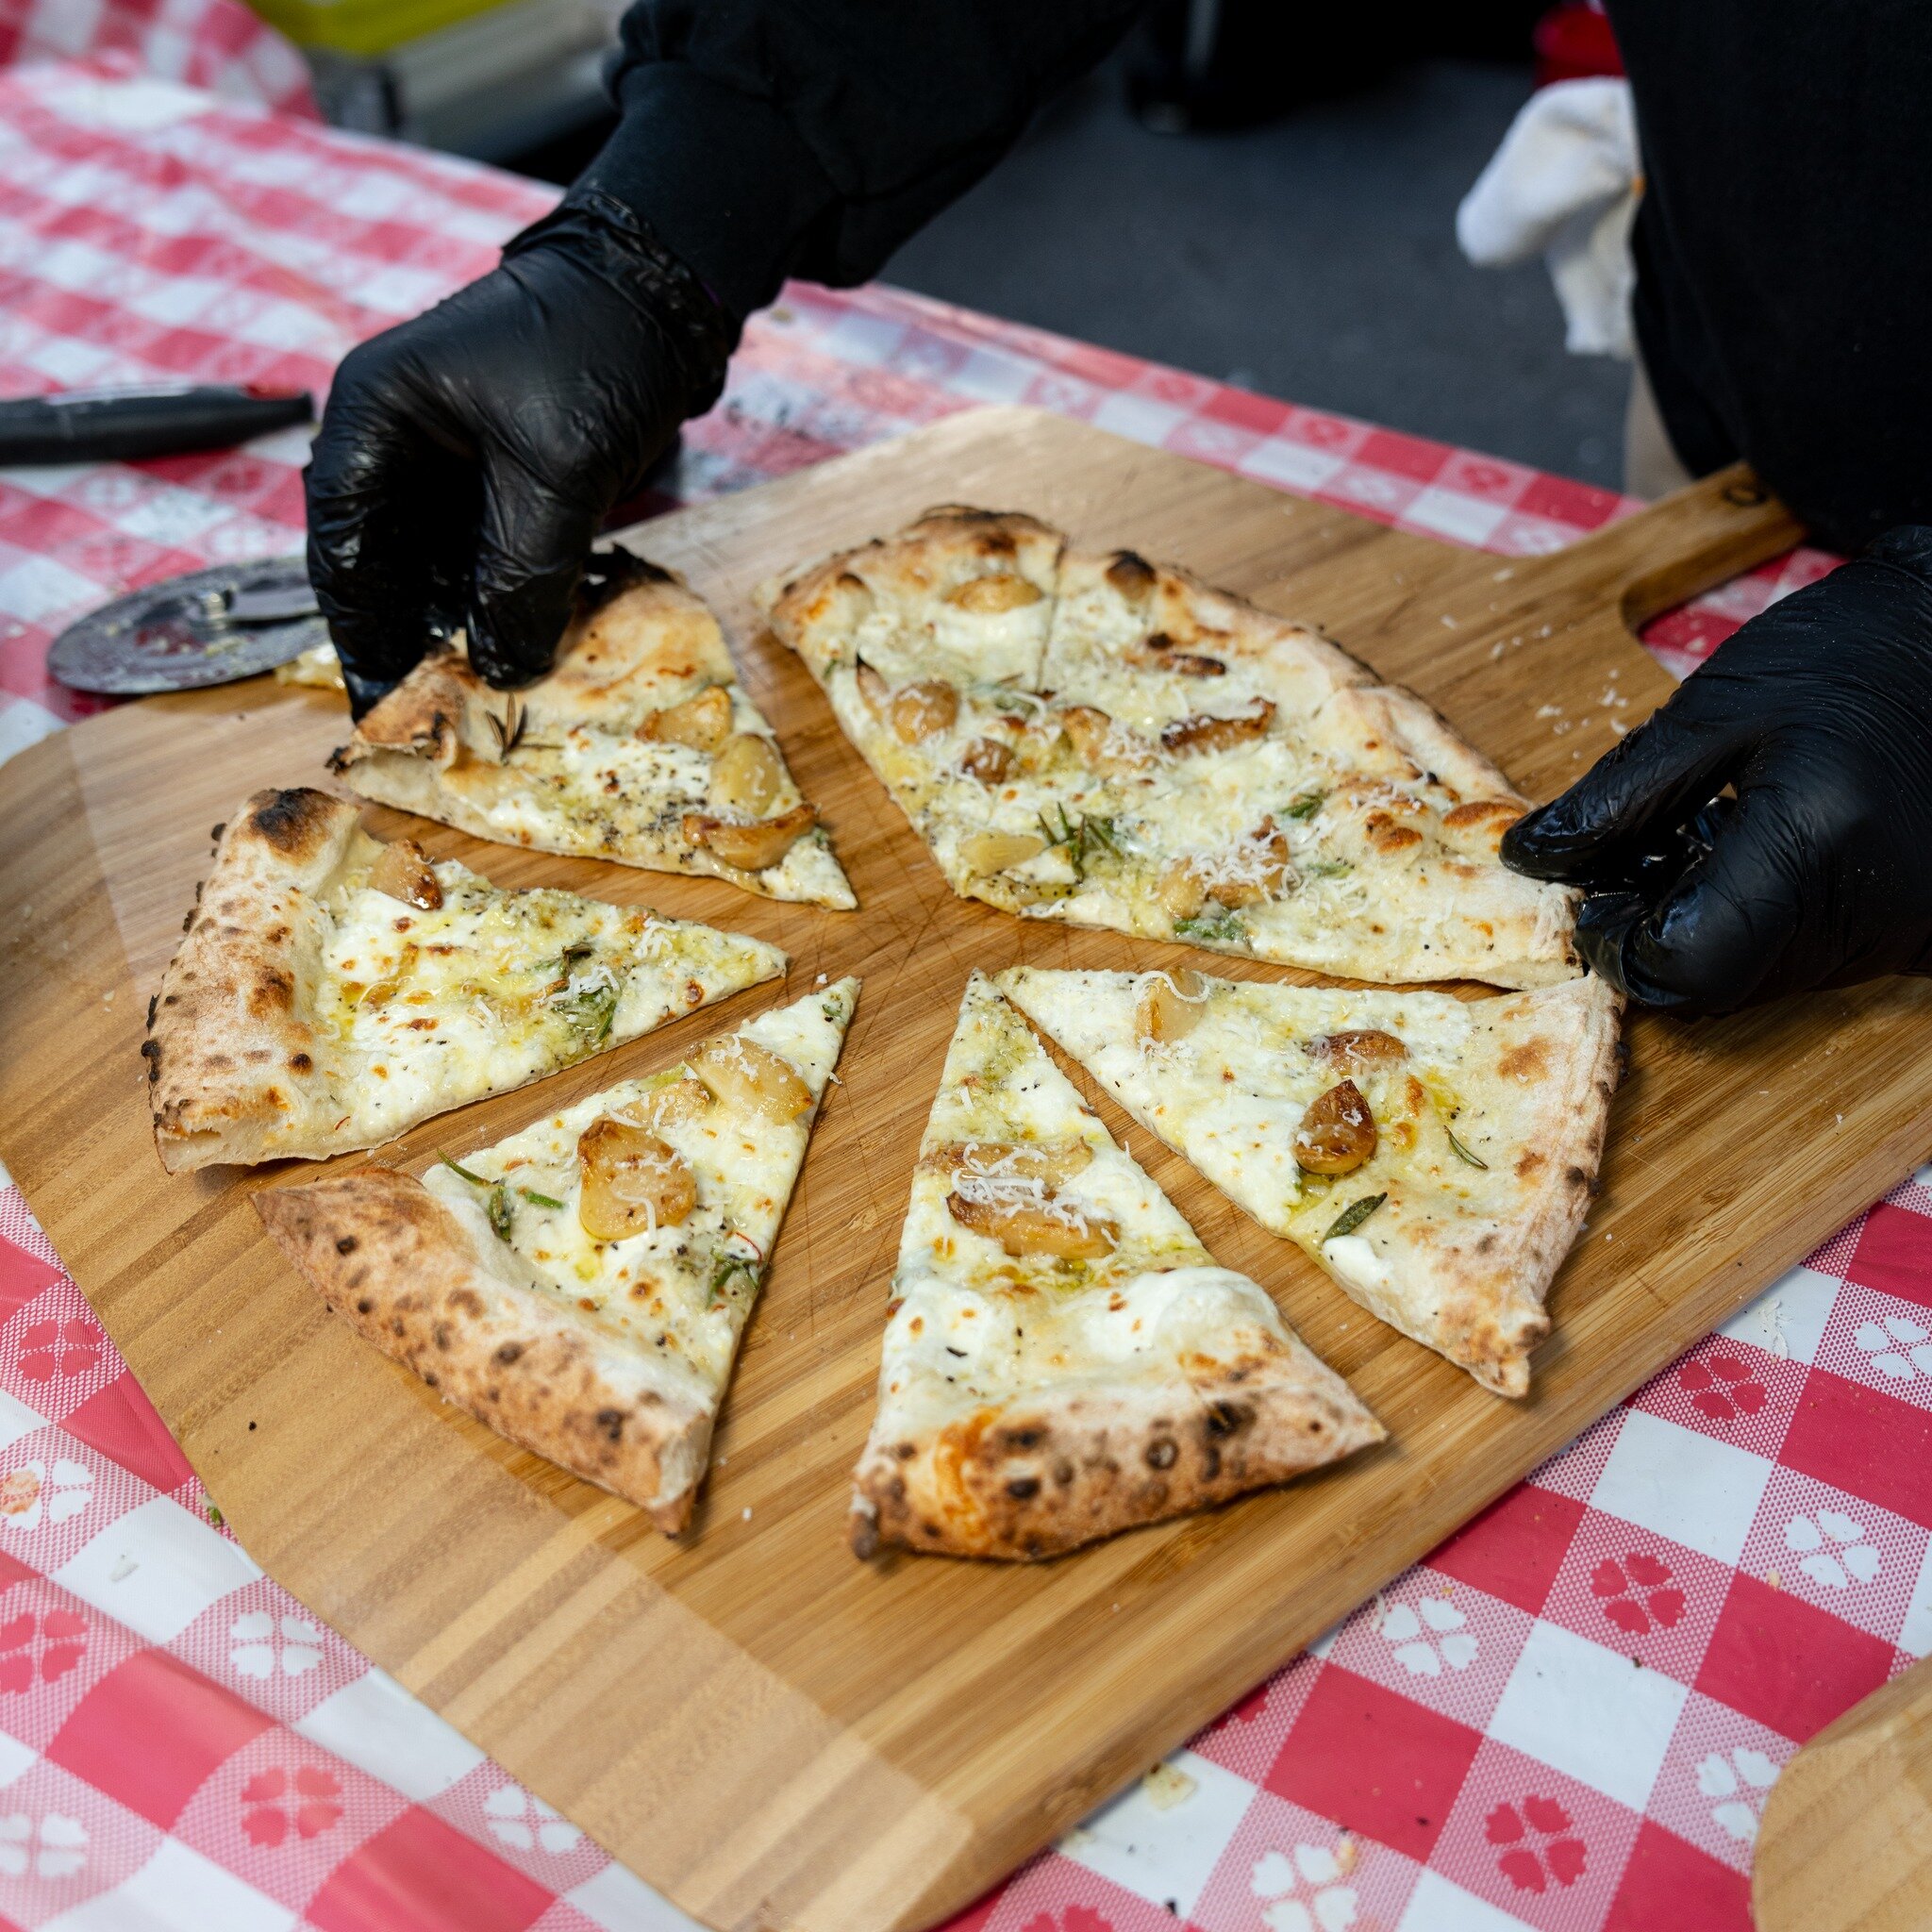 Divide and conquer🍕💪 That's how we #SliceOutHunger nationwide! By working with pizzerias like you across the US to #PieItForward, we can create a widespread impact in the fight against hunger. 

Are you ready to take a slice? Get involved today by 